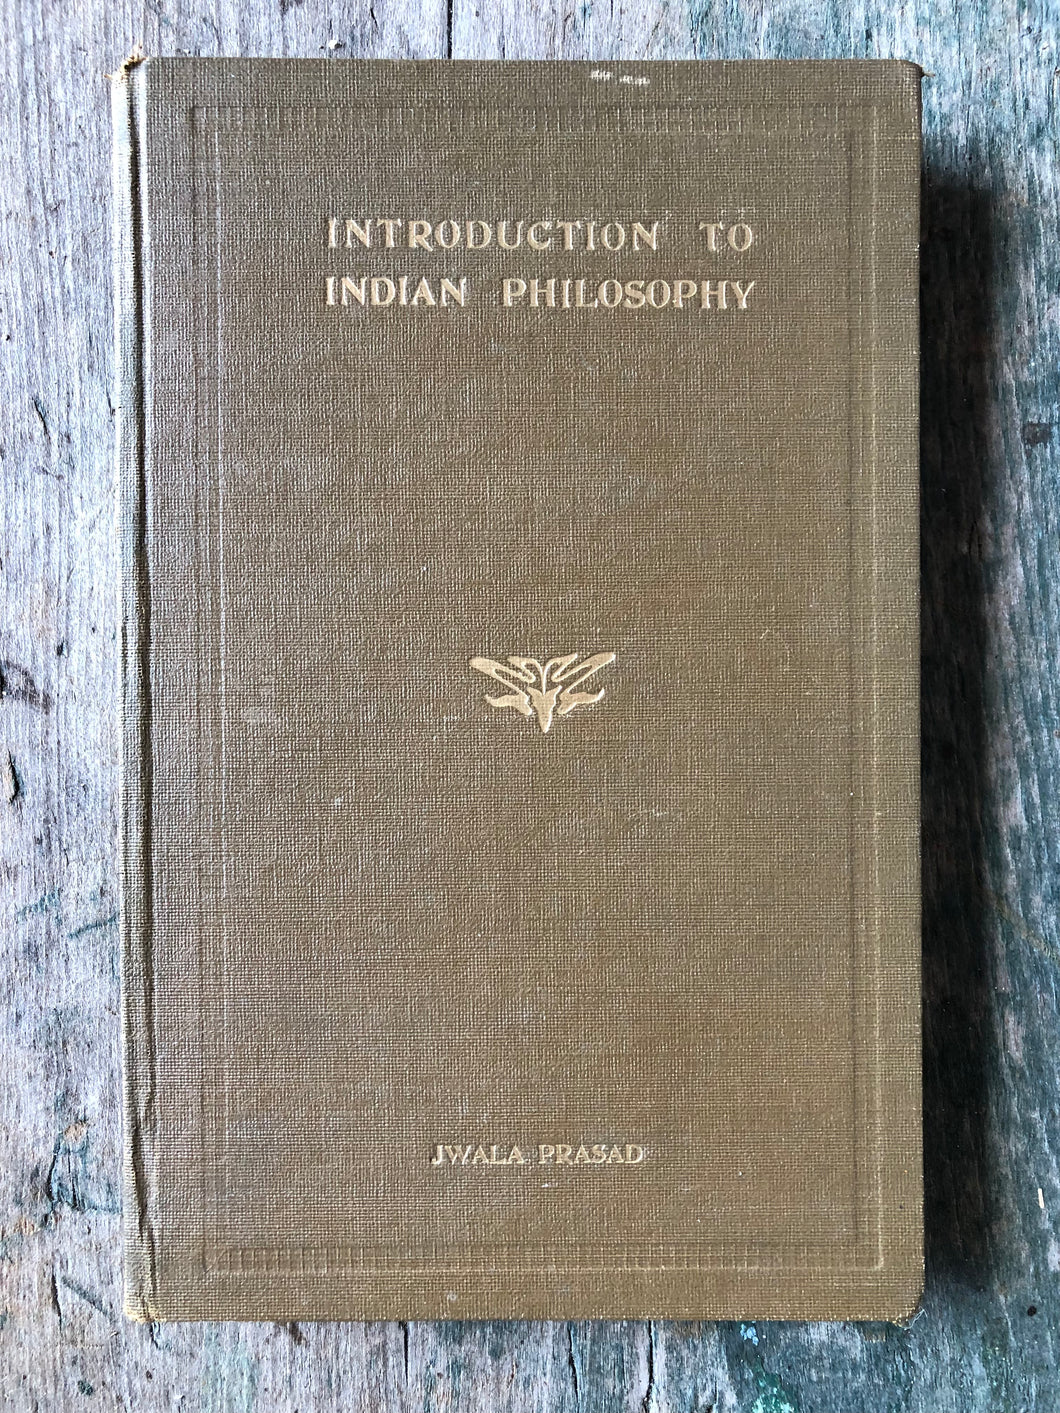 Introduction to Indian Philosophy by Jwala Prasad with a forward by R. D. Ranade